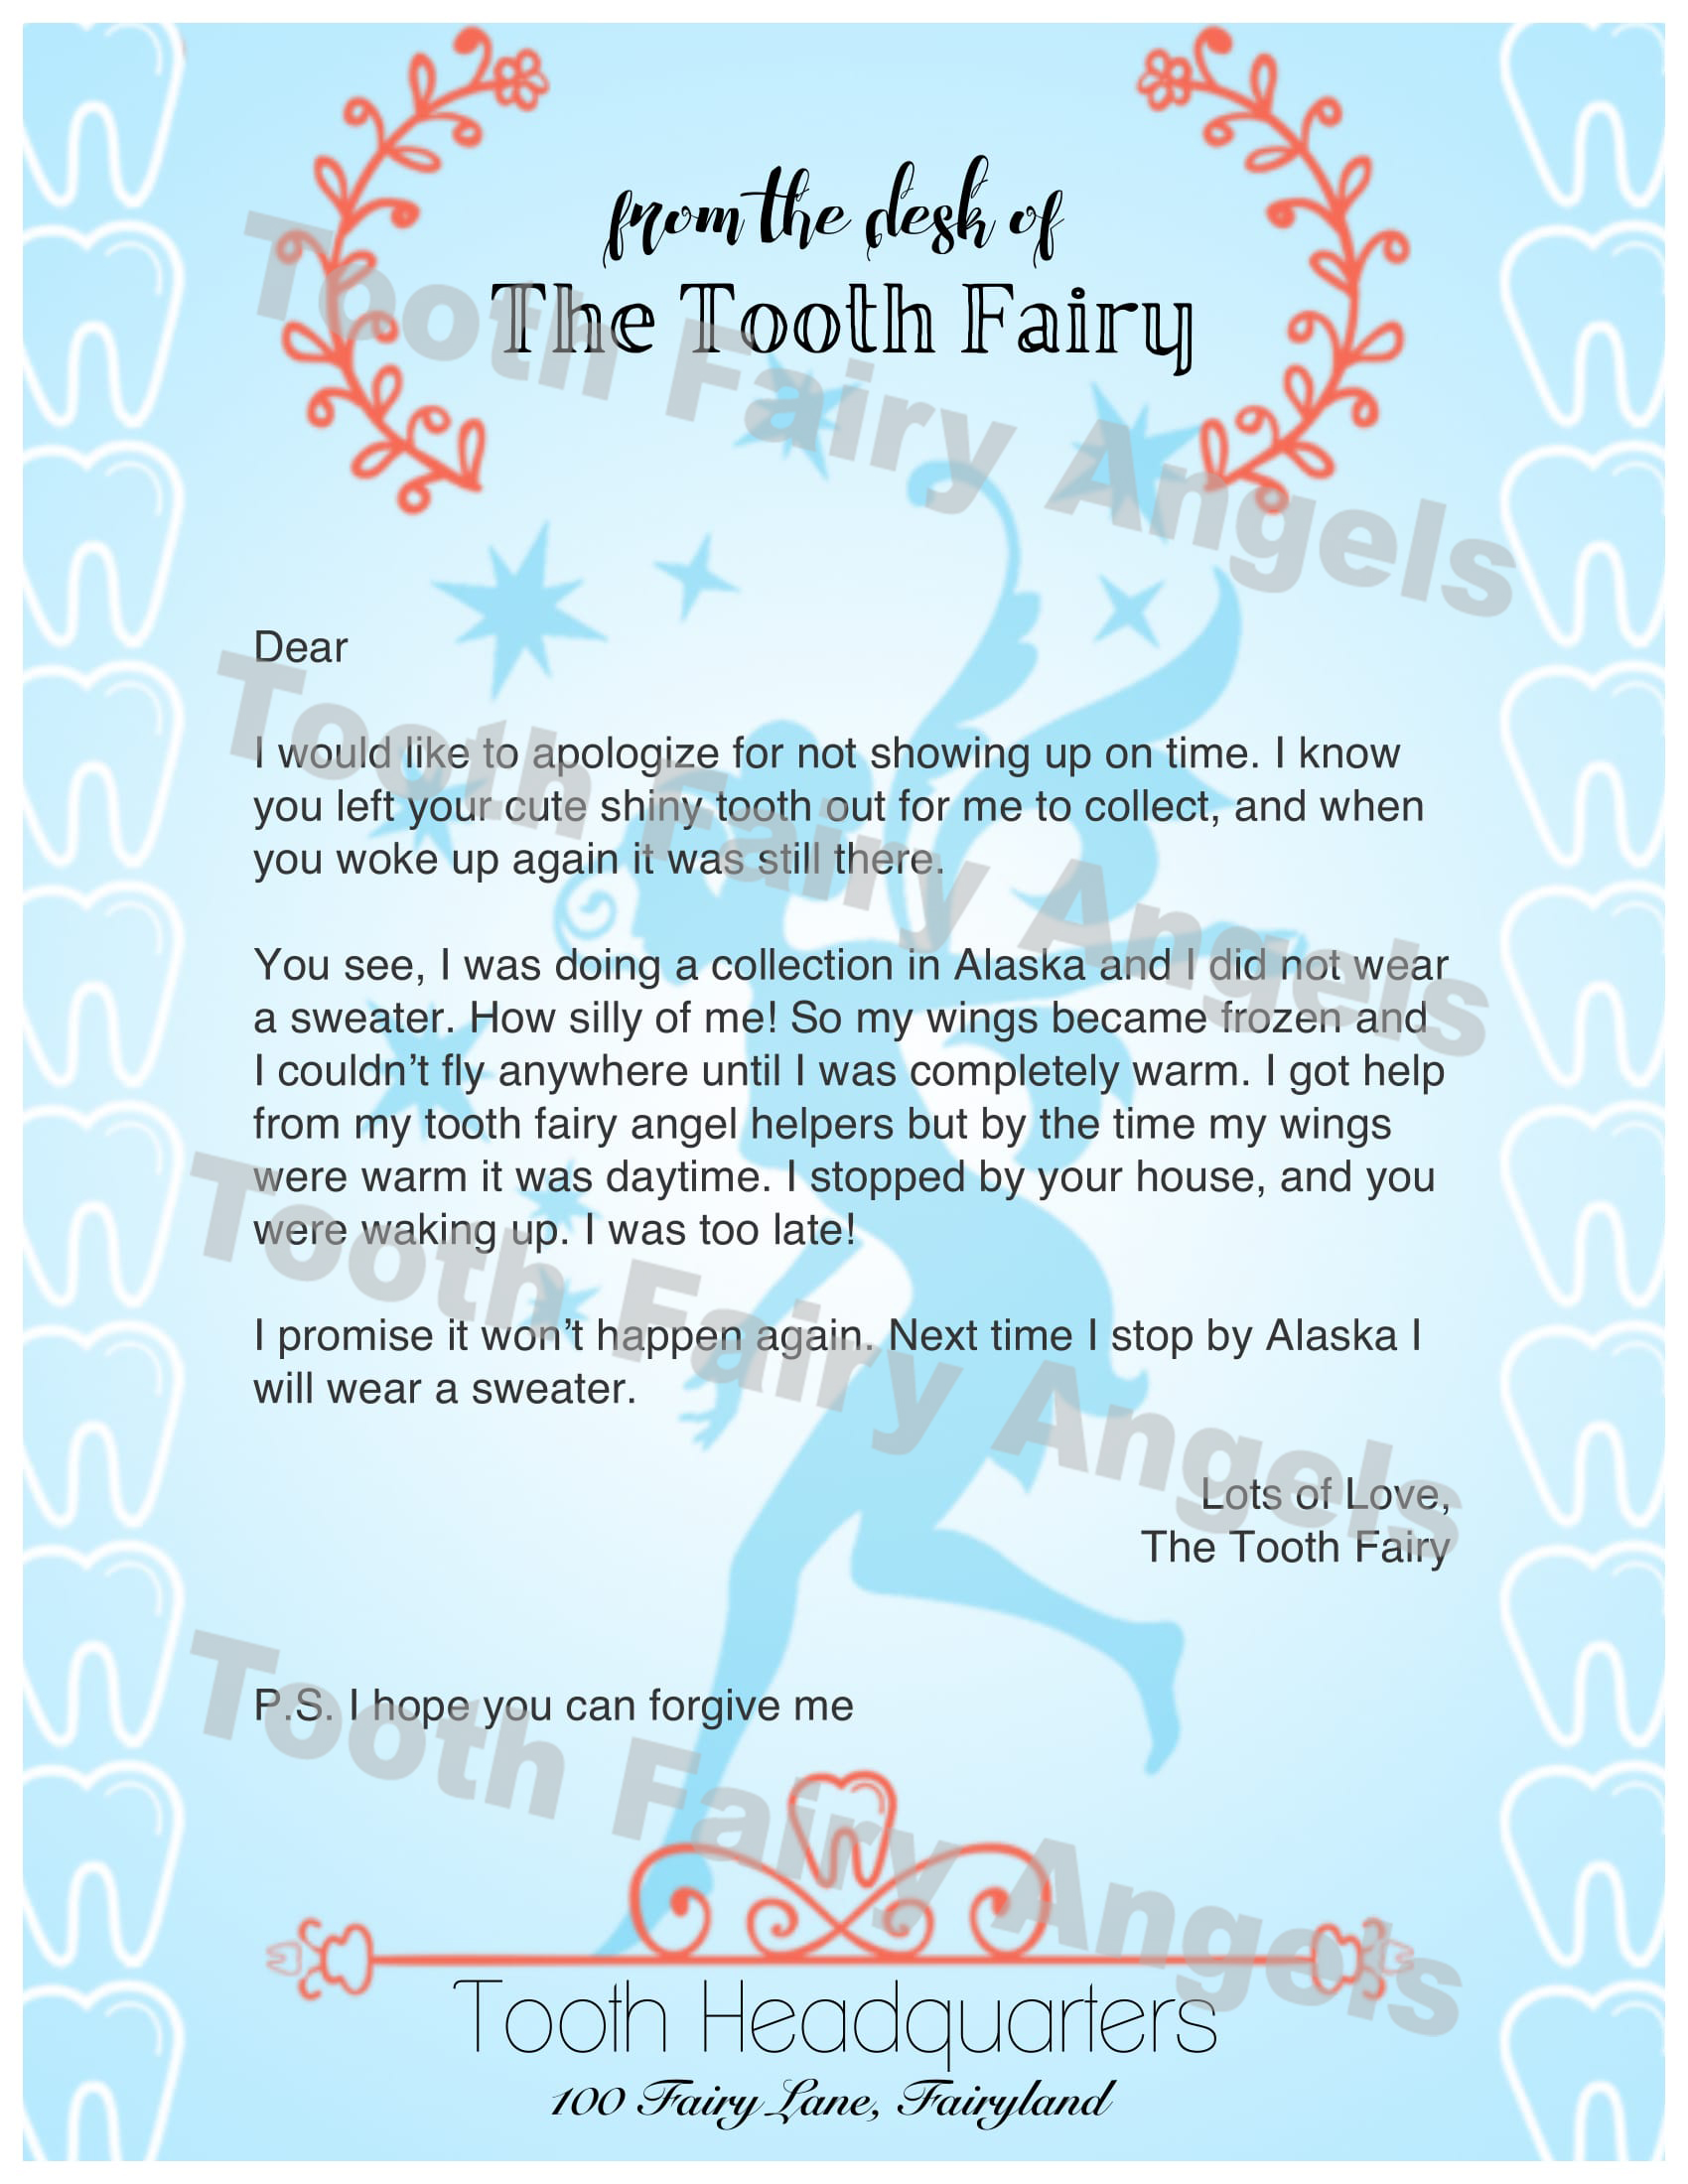 customizable-tooth-fairy-apology-letter-printable